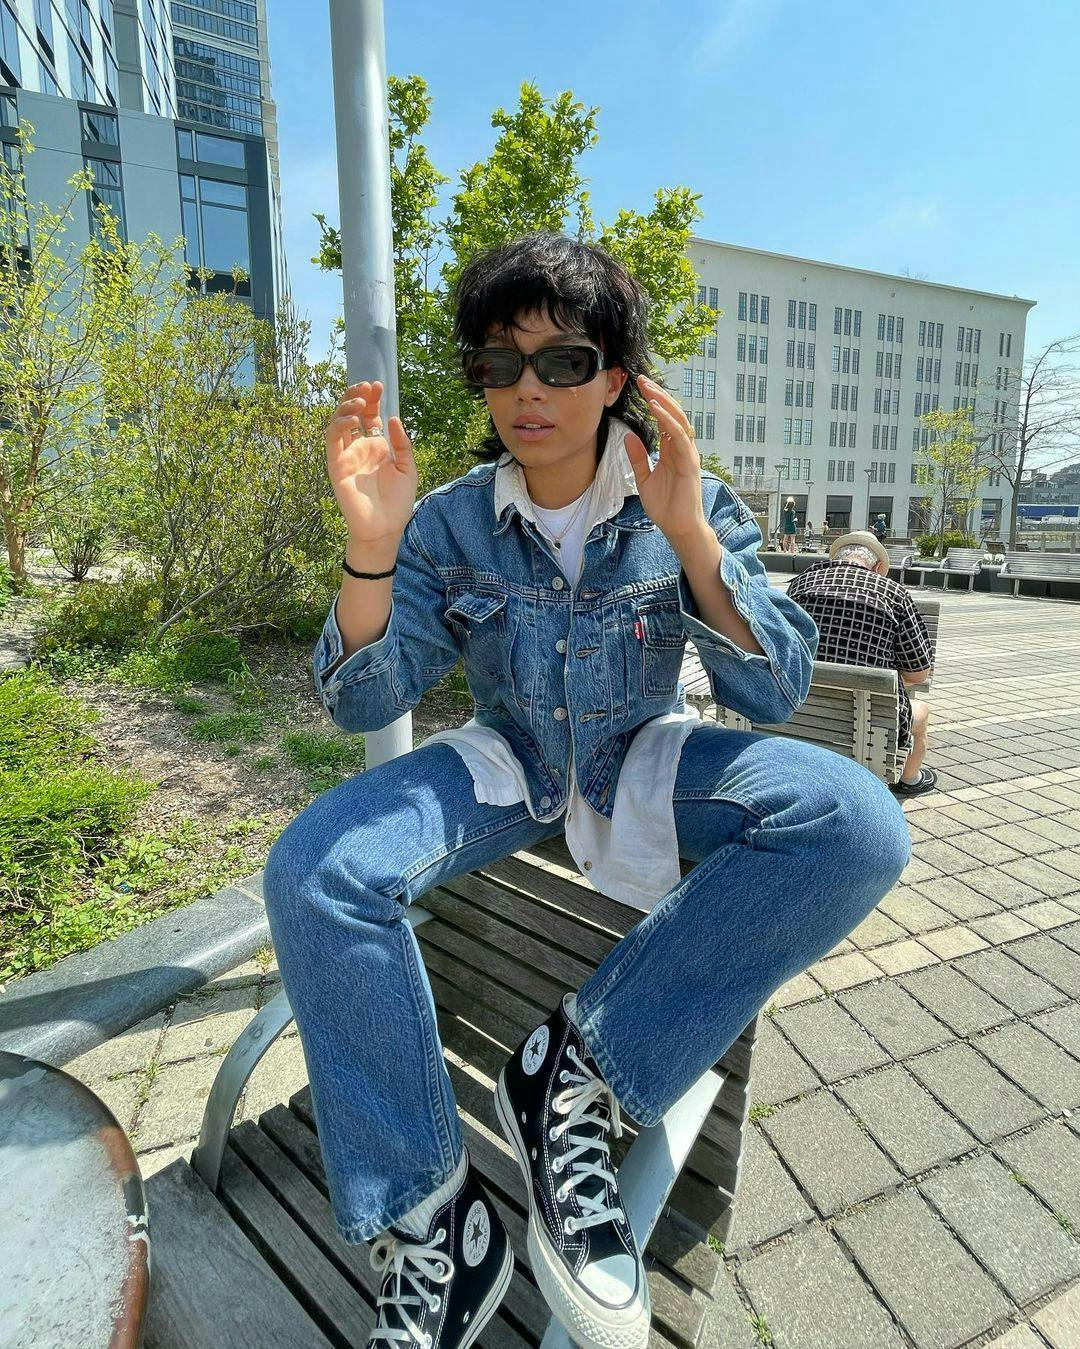 pants clothing apparel person jeans shoe footwear sunglasses accessories sitting